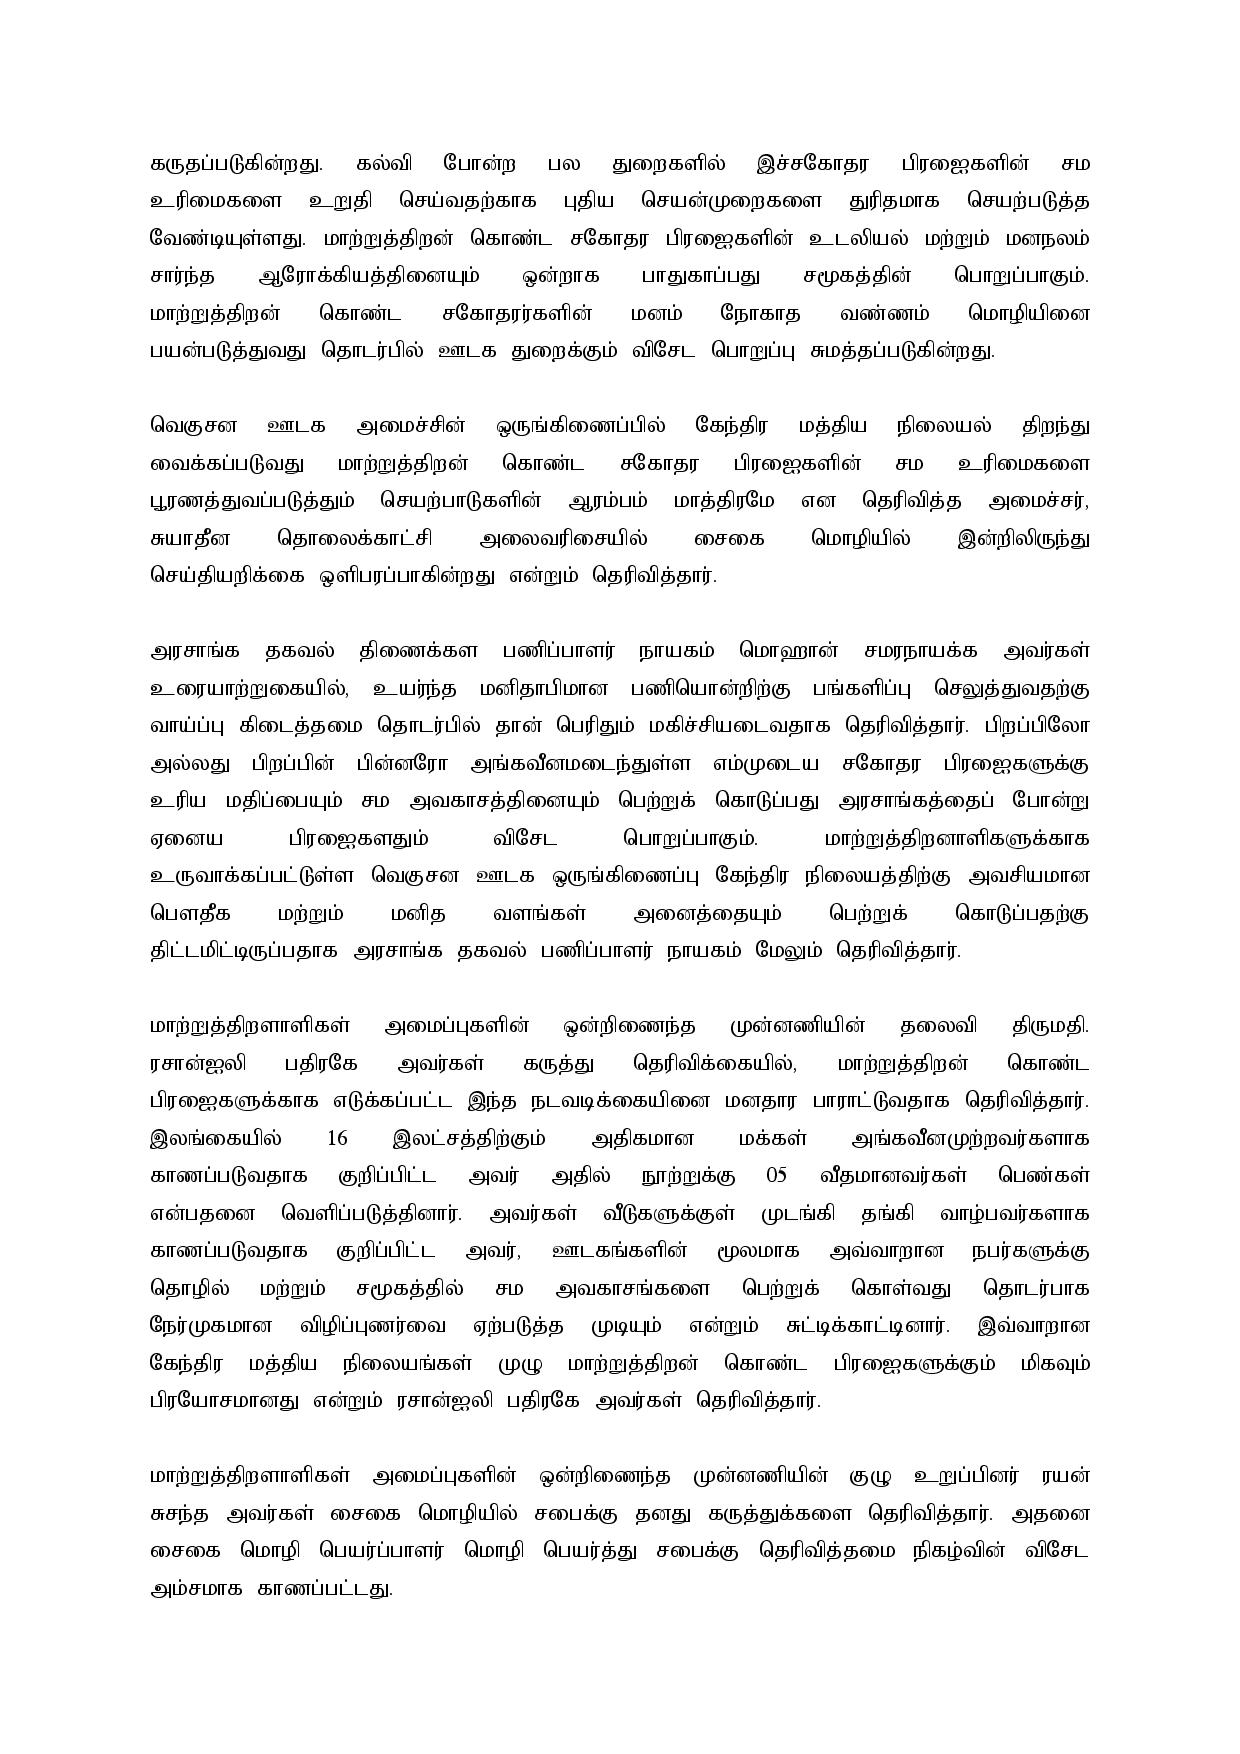 Press Release 970 Tamil page 002